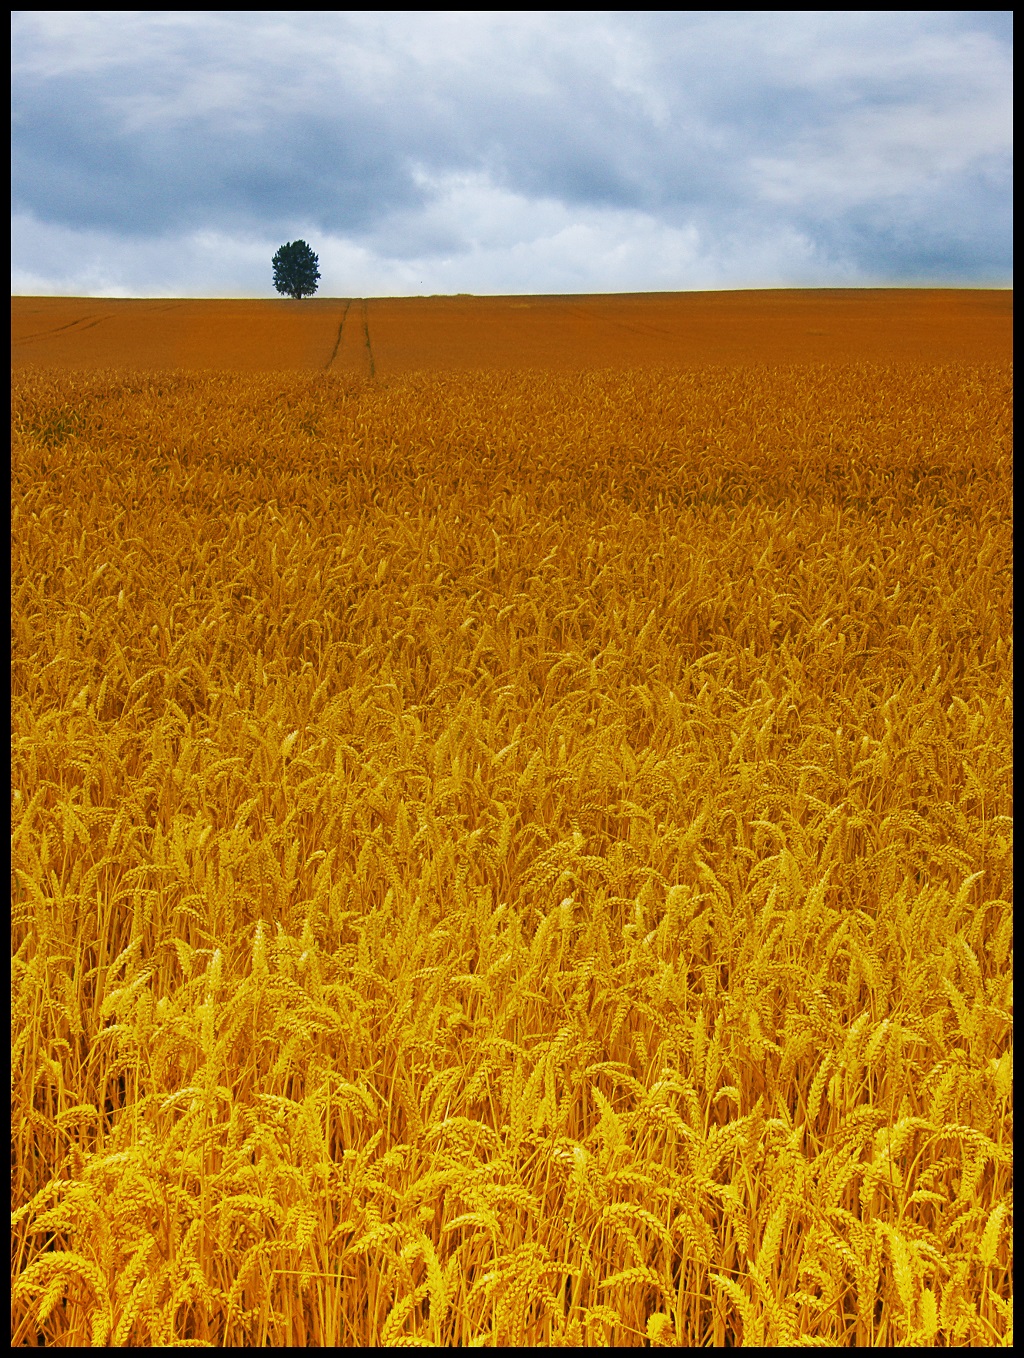 Lone tree in the midst of cornfields.